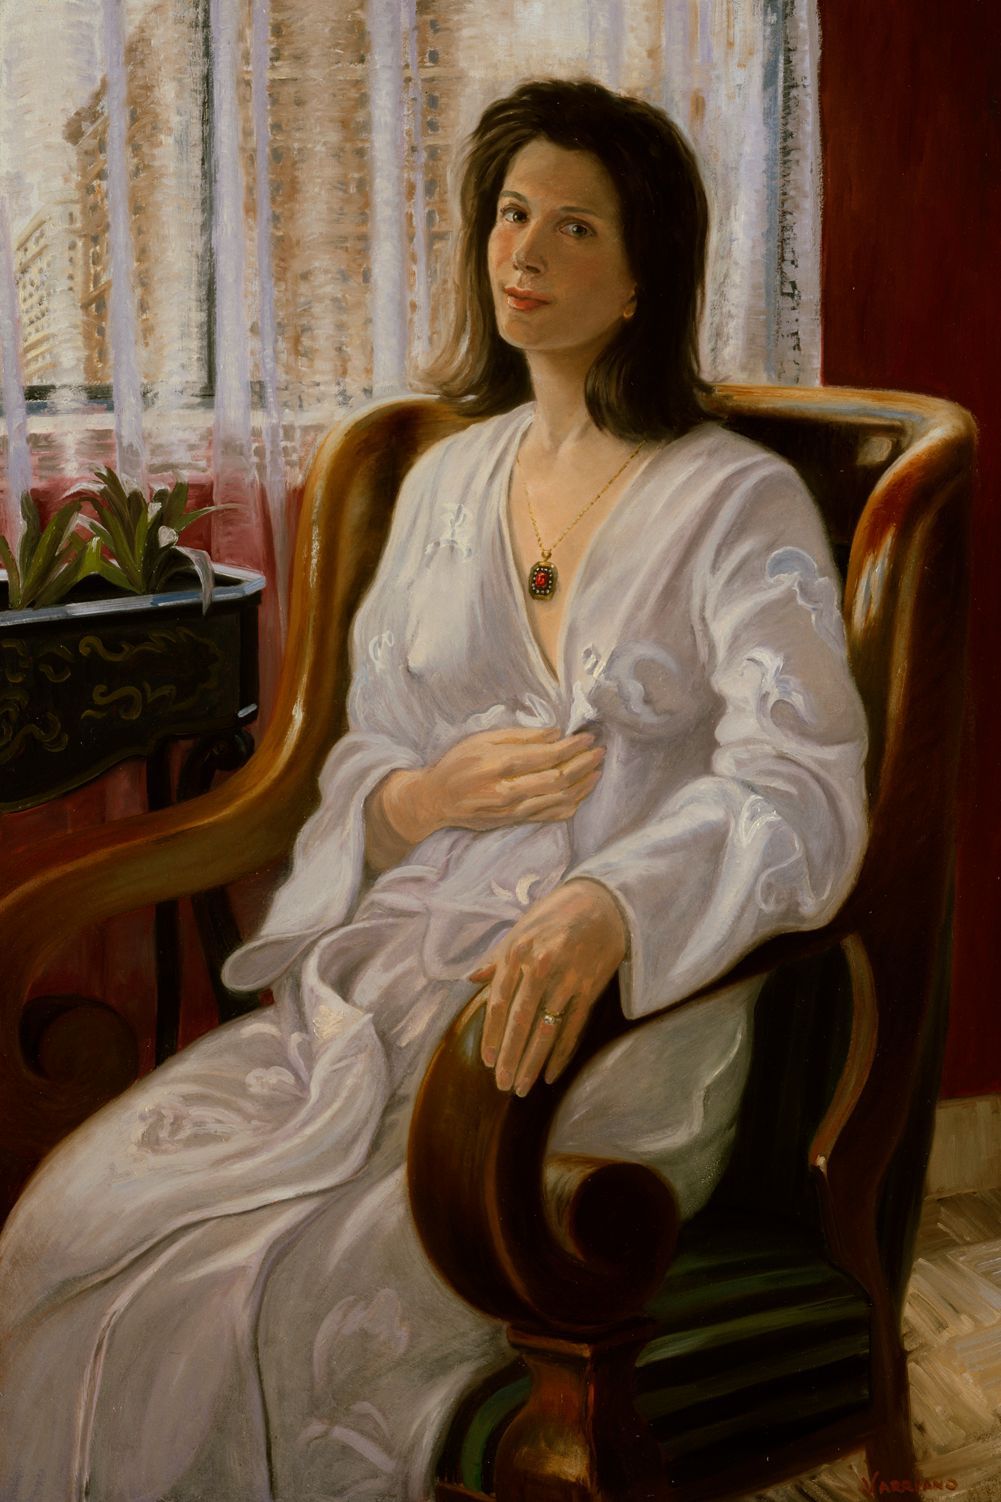 By The Window | Figurative Oil Painting by John Varriano